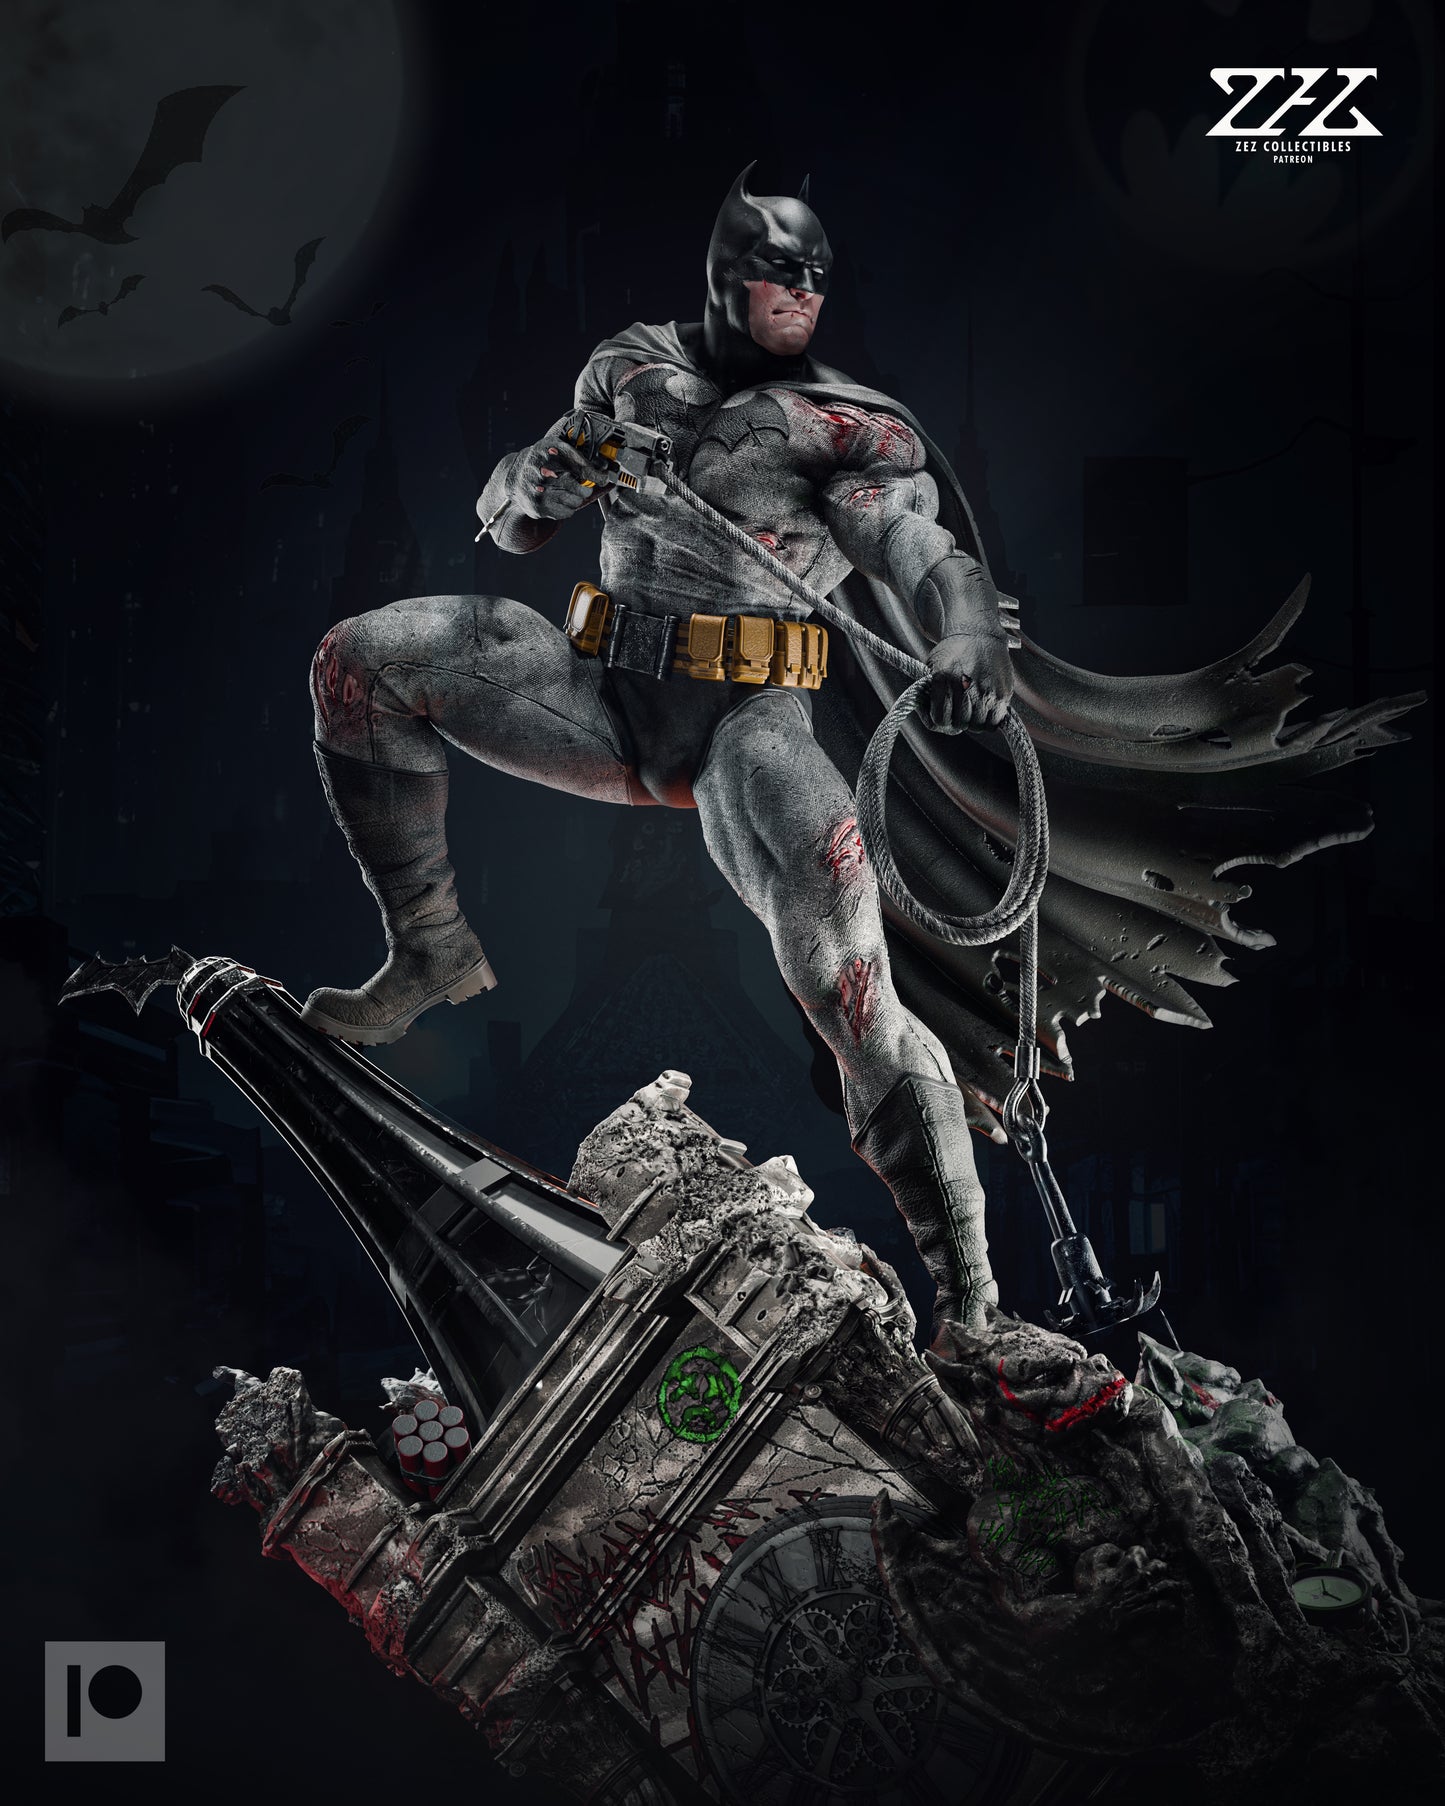 A highly detailed figurine of a battle-worn superhero standing heroically on a gothic, debris-filled base. The figure is dressed in a gray and black costume with a cowl and cape, featuring realistic textures and battle scars. He holds a grappling hook in his right hand and his left foot is raised, as if stepping over the rubble. The background shows a dark cityscape under a moonlit sky with a bat silhouette flying. The image includes a logo for ZEZ Collectibles at the top right.